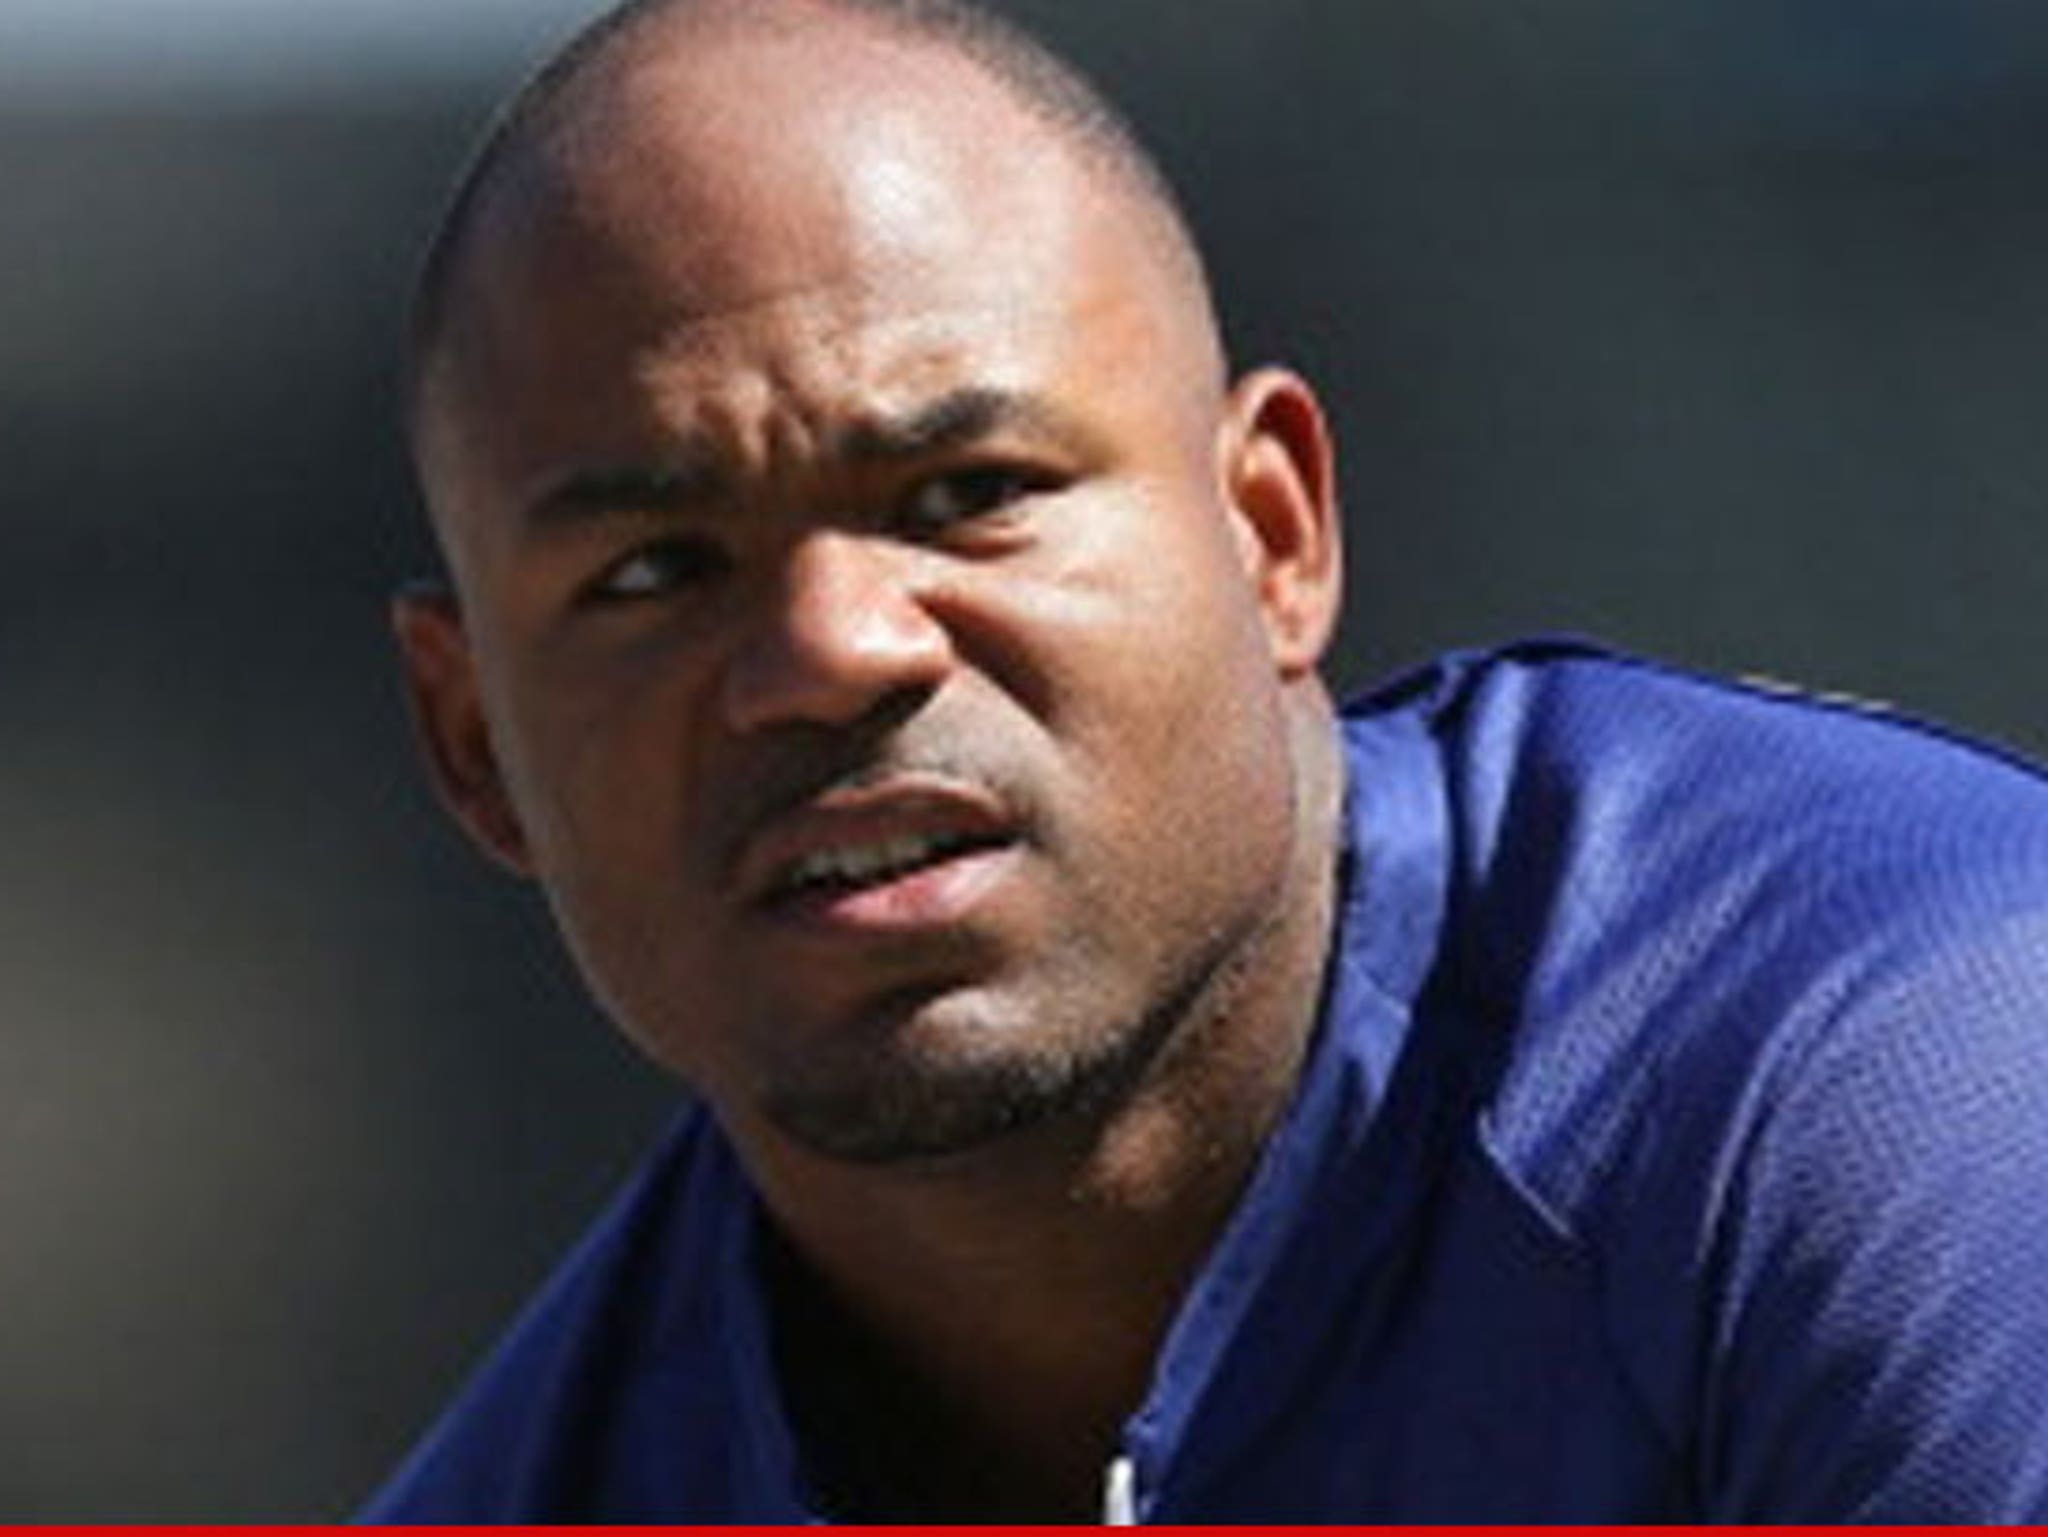 What do you think of Carl Crawford's new face tat?